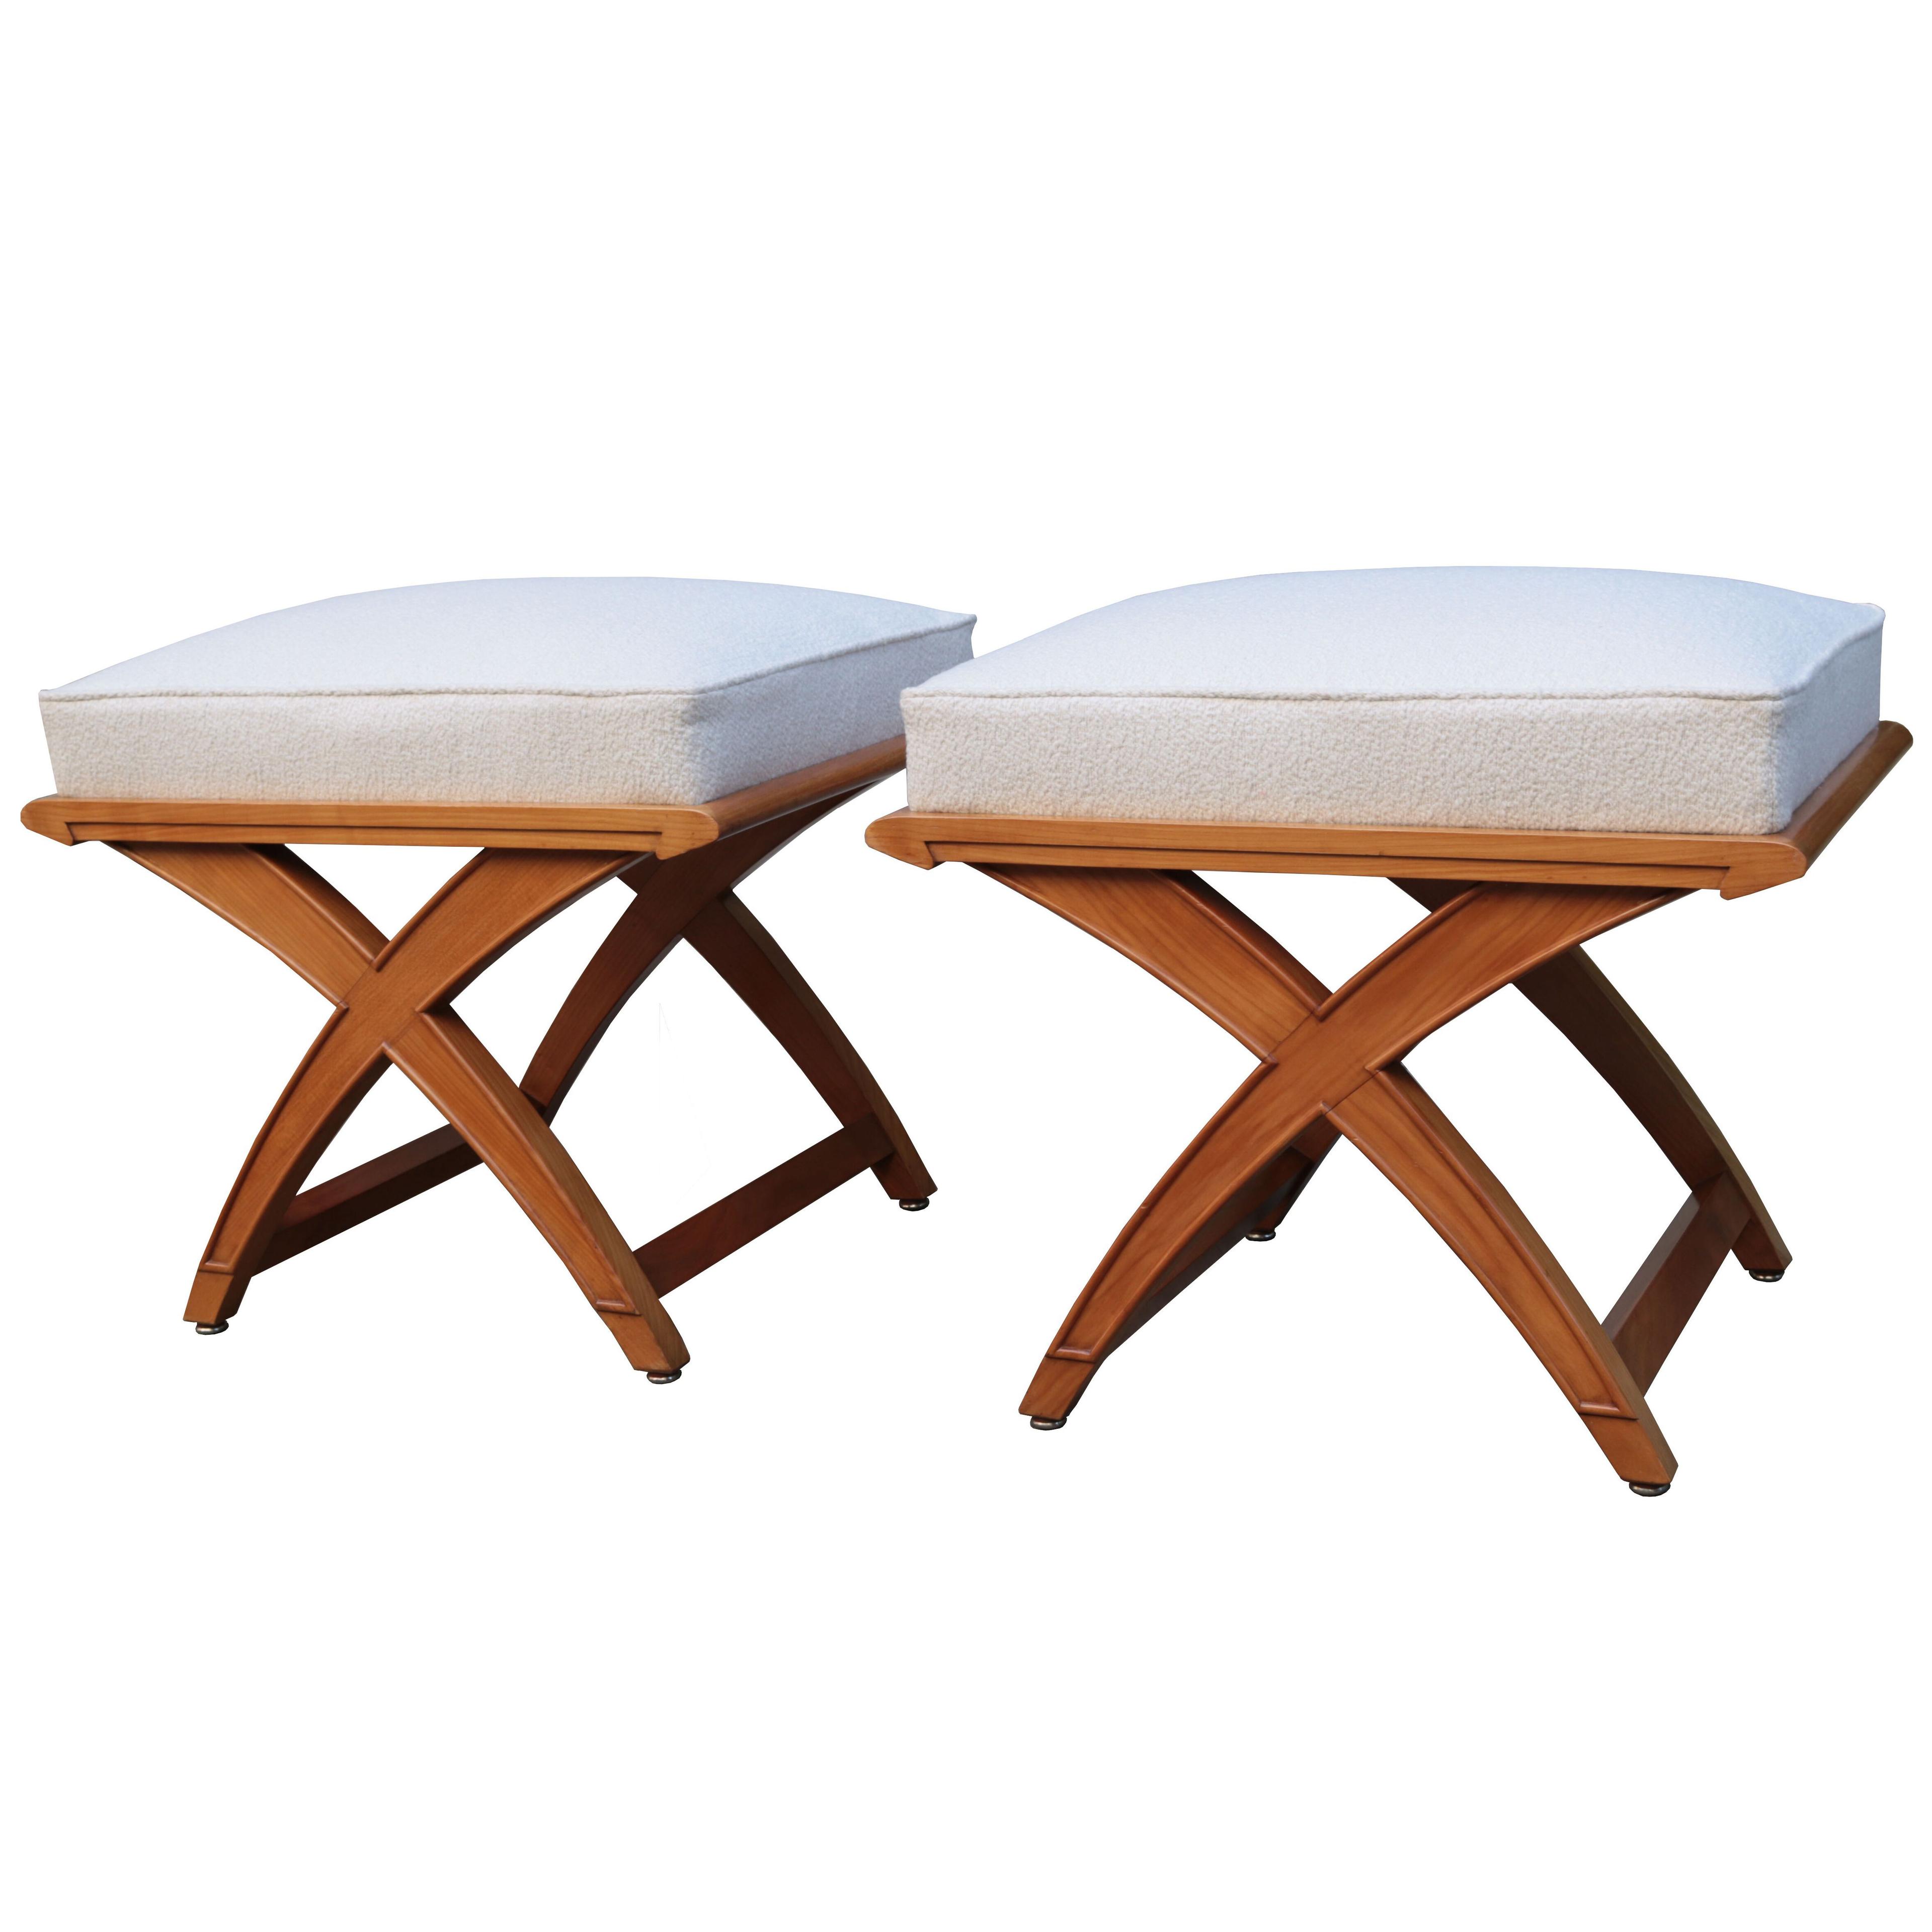 A Pair of Modernist Stools 